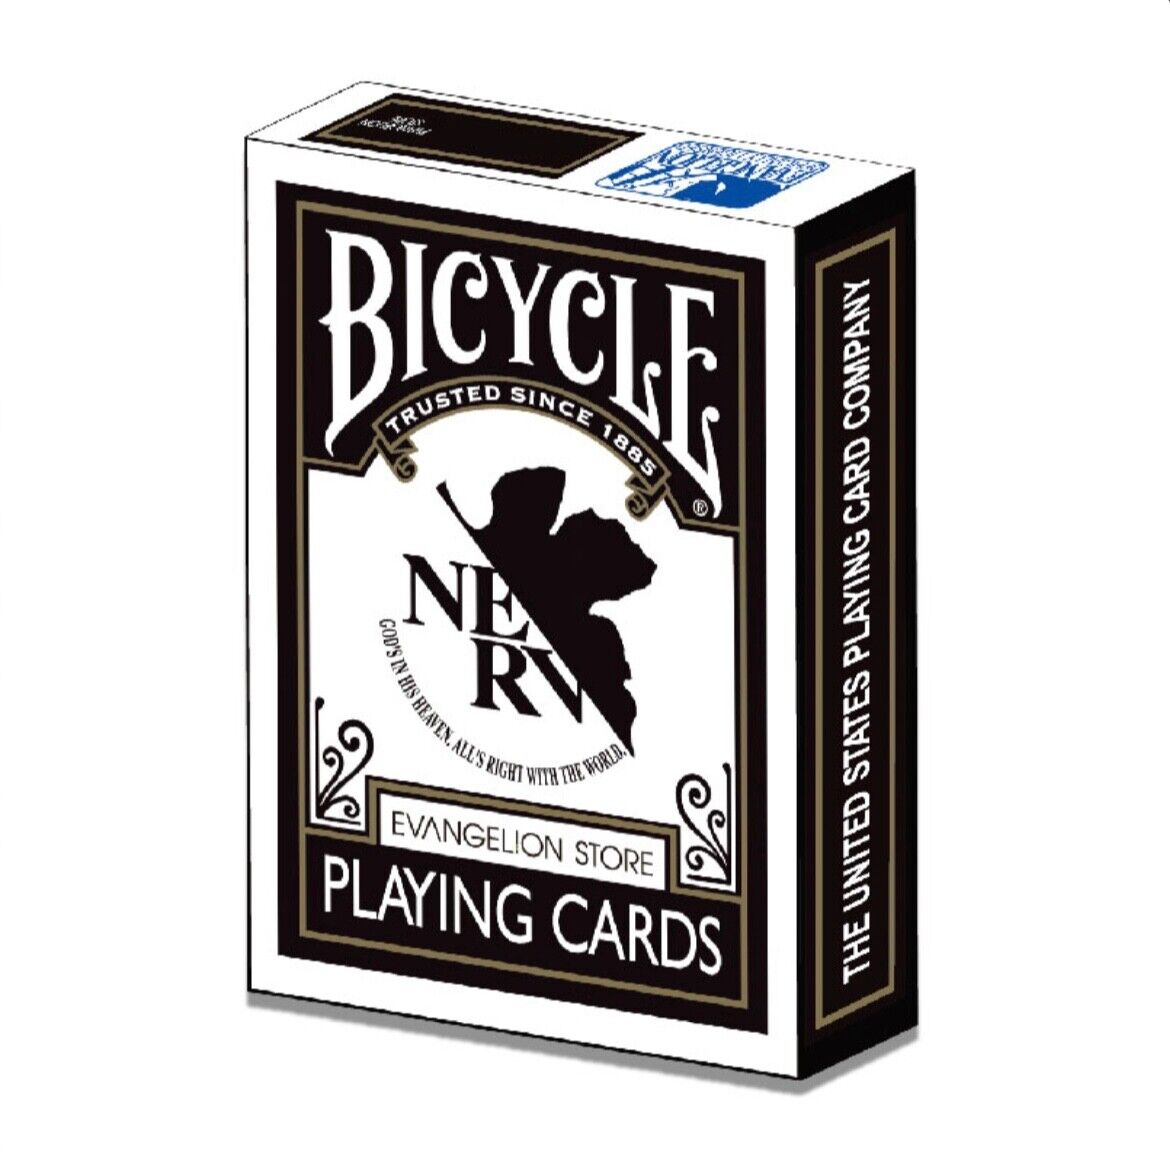 Bicycle Evangelion Playing Cards EVA STORE Limited / Trump / Rare Japan New